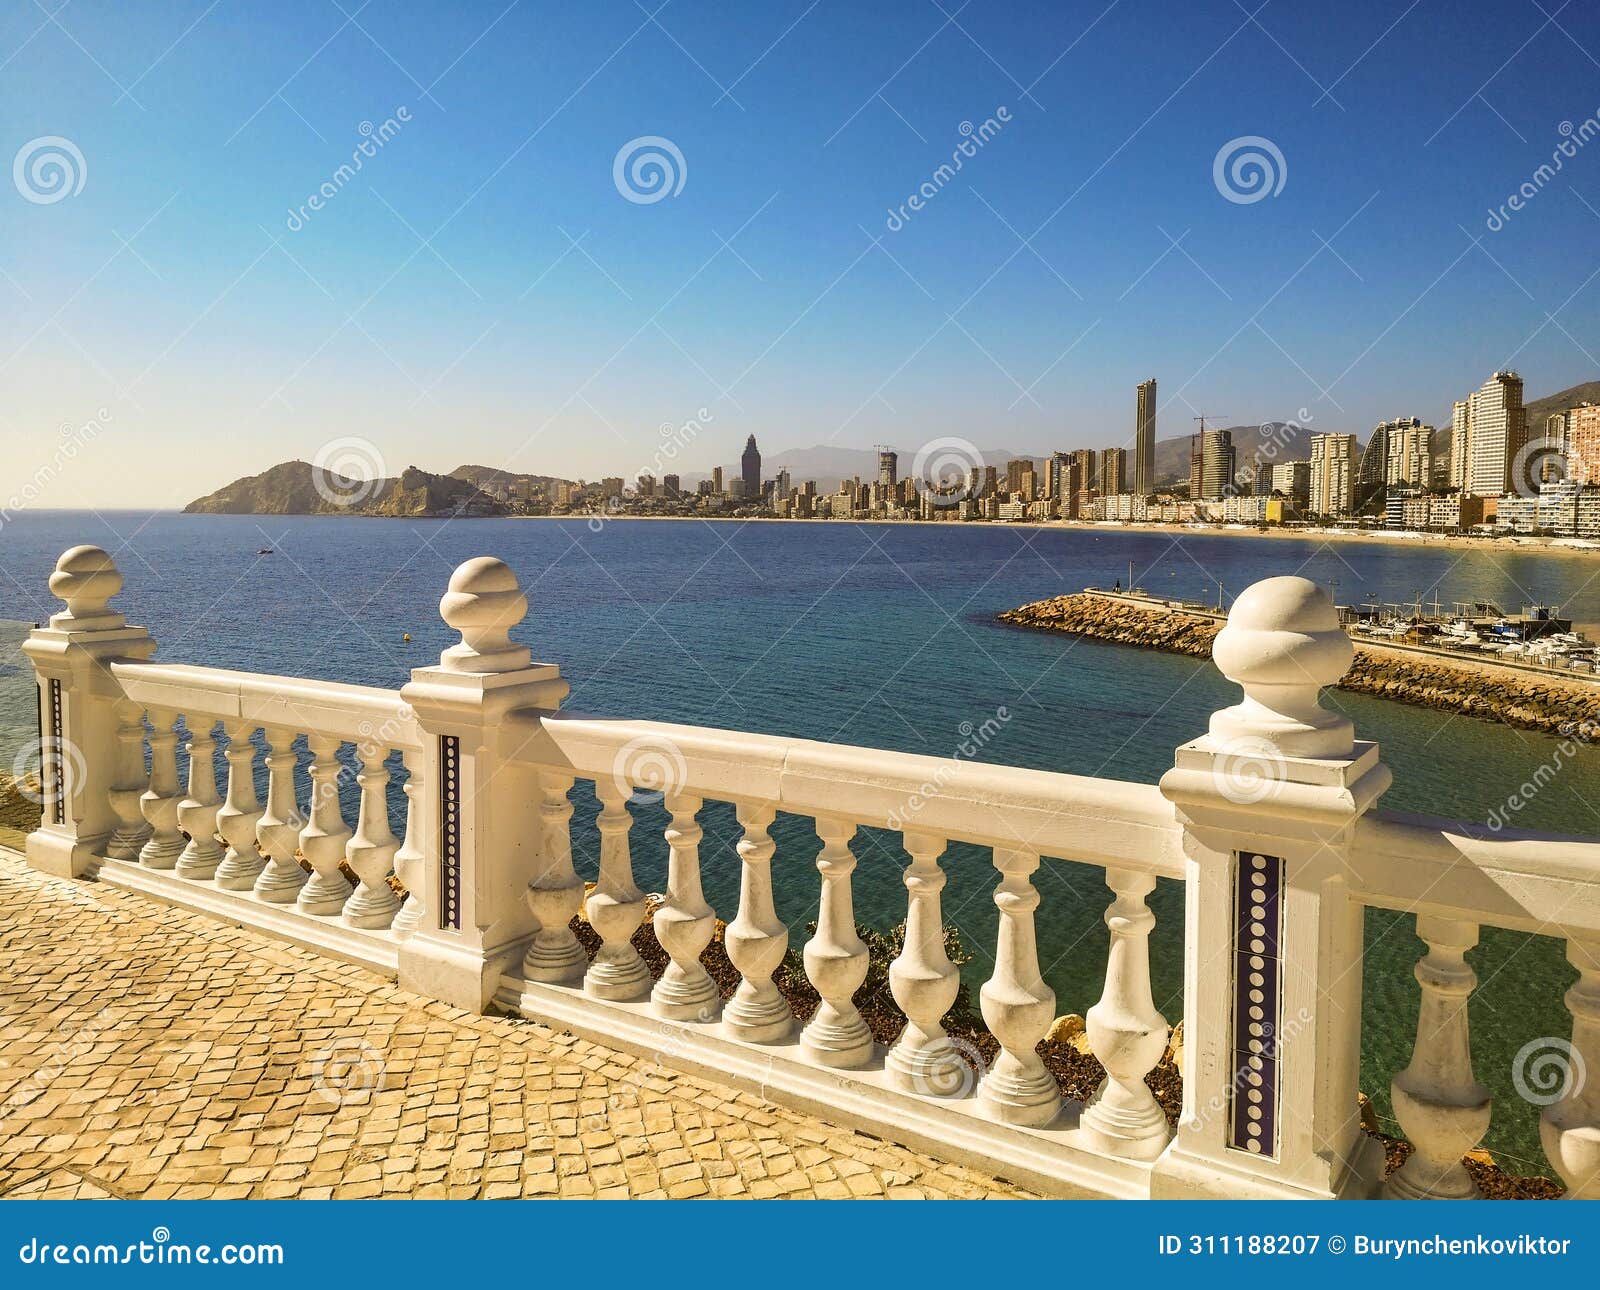 observation deck with balustrades over the bay of benidorm spain